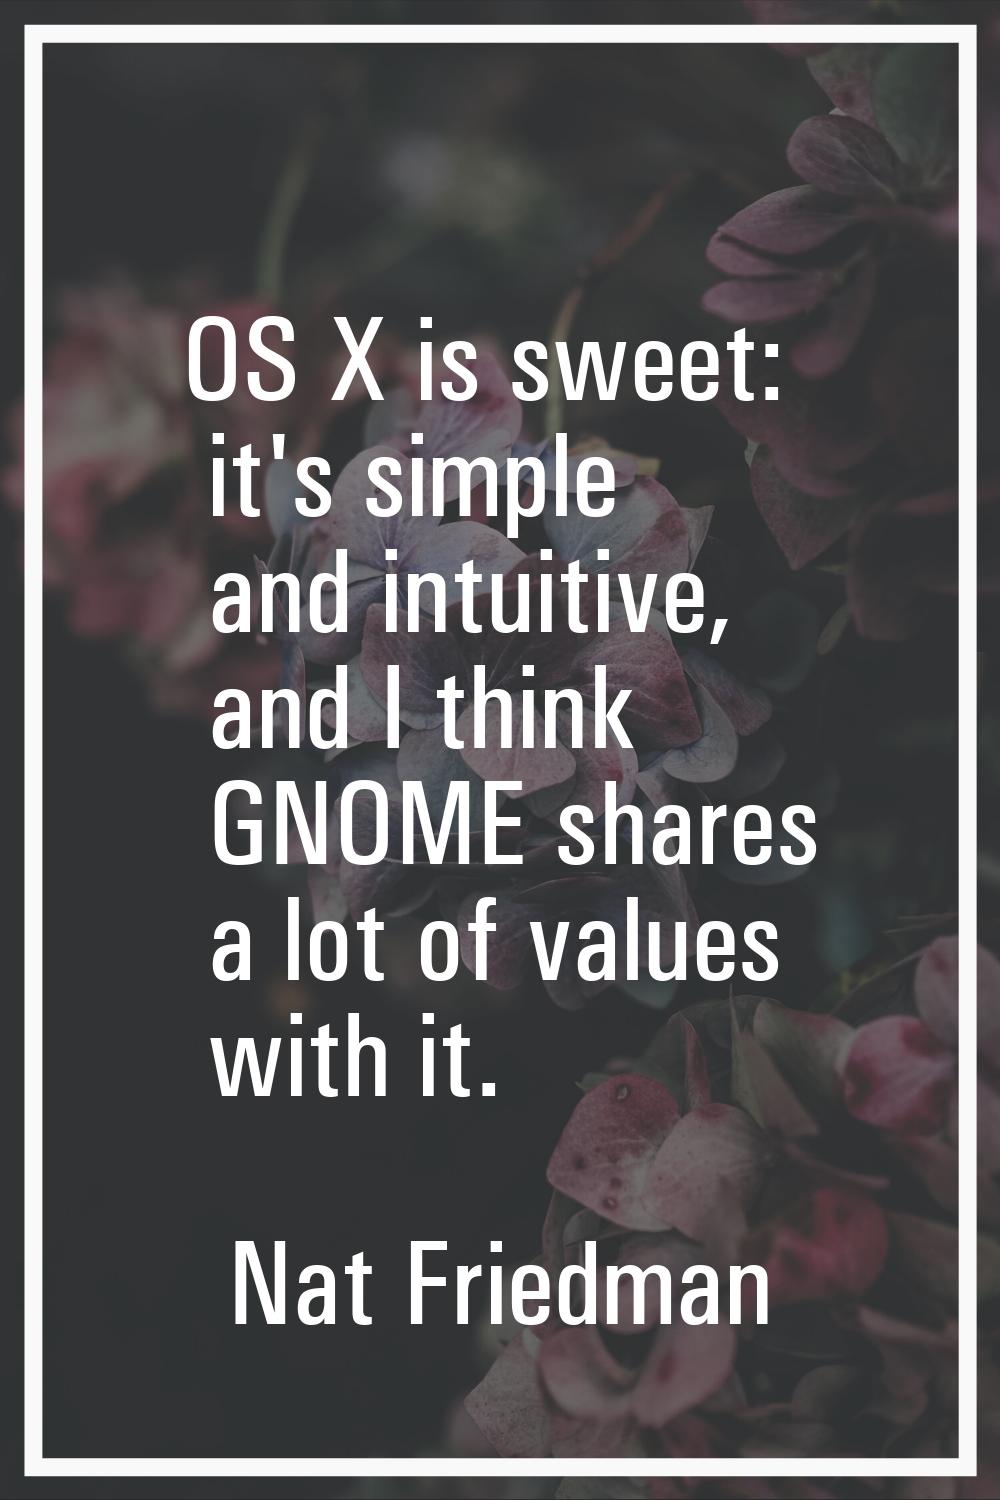 OS X is sweet: it's simple and intuitive, and I think GNOME shares a lot of values with it.